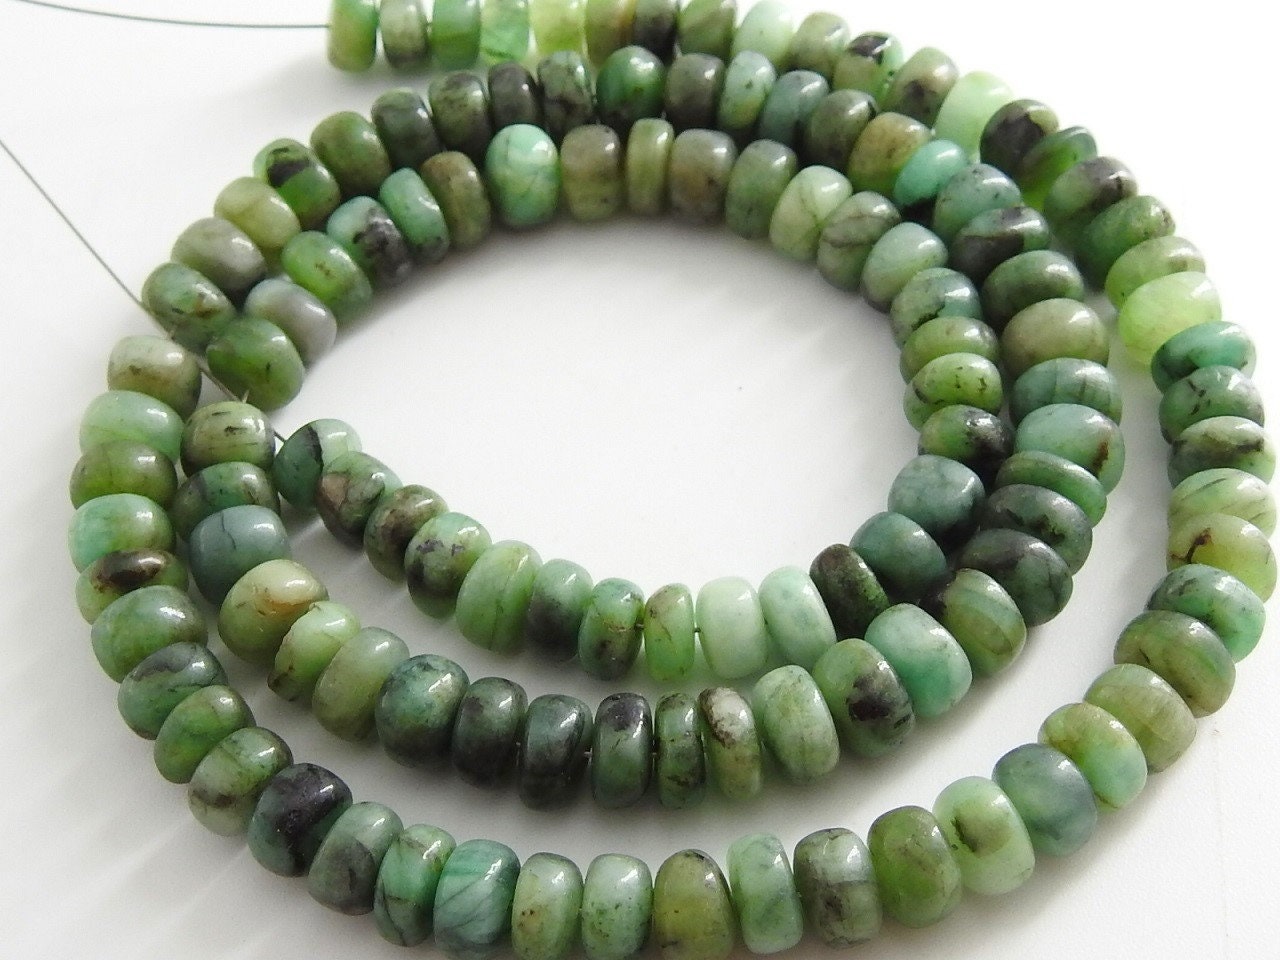 Emerald Smooth Roundel Bead,Shaded,Loose Stone,Handmade,Wholesale Price,New Arrival,18Inch Strand 100%Natural PME(B12) | Save 33% - Rajasthan Living 19